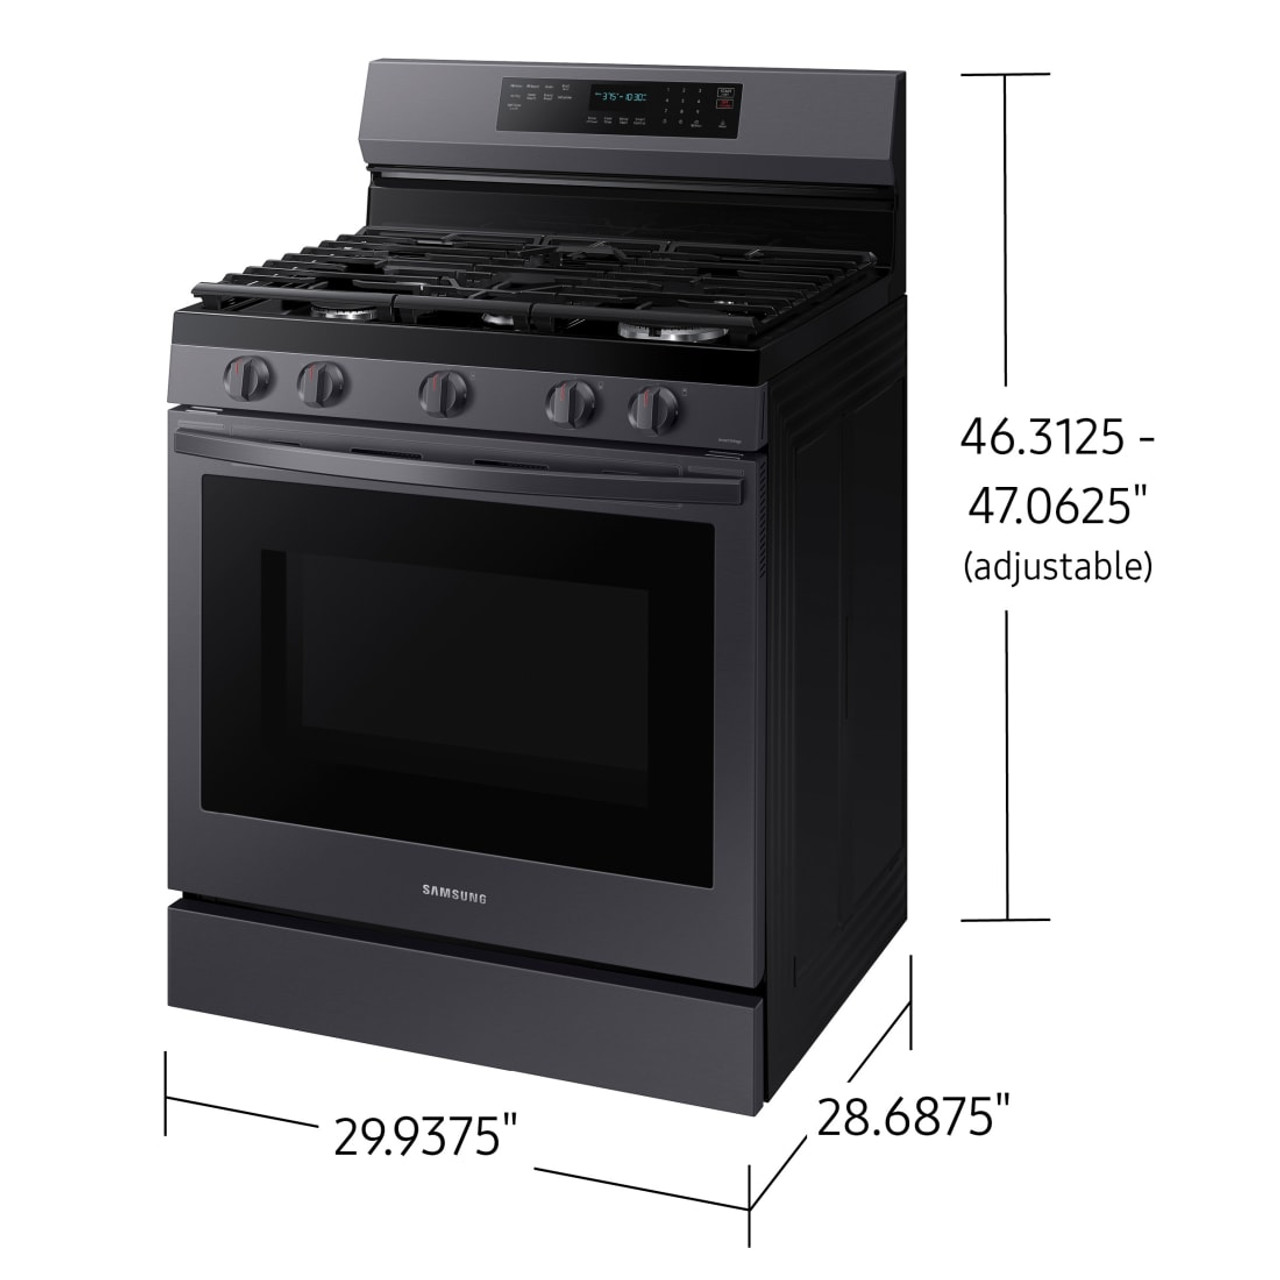 Samsung 6.0 cu. ft. Smart Freestanding Gas Range with Flex Duo, Stainless Cooktop & Air Fry - Stainless Steel